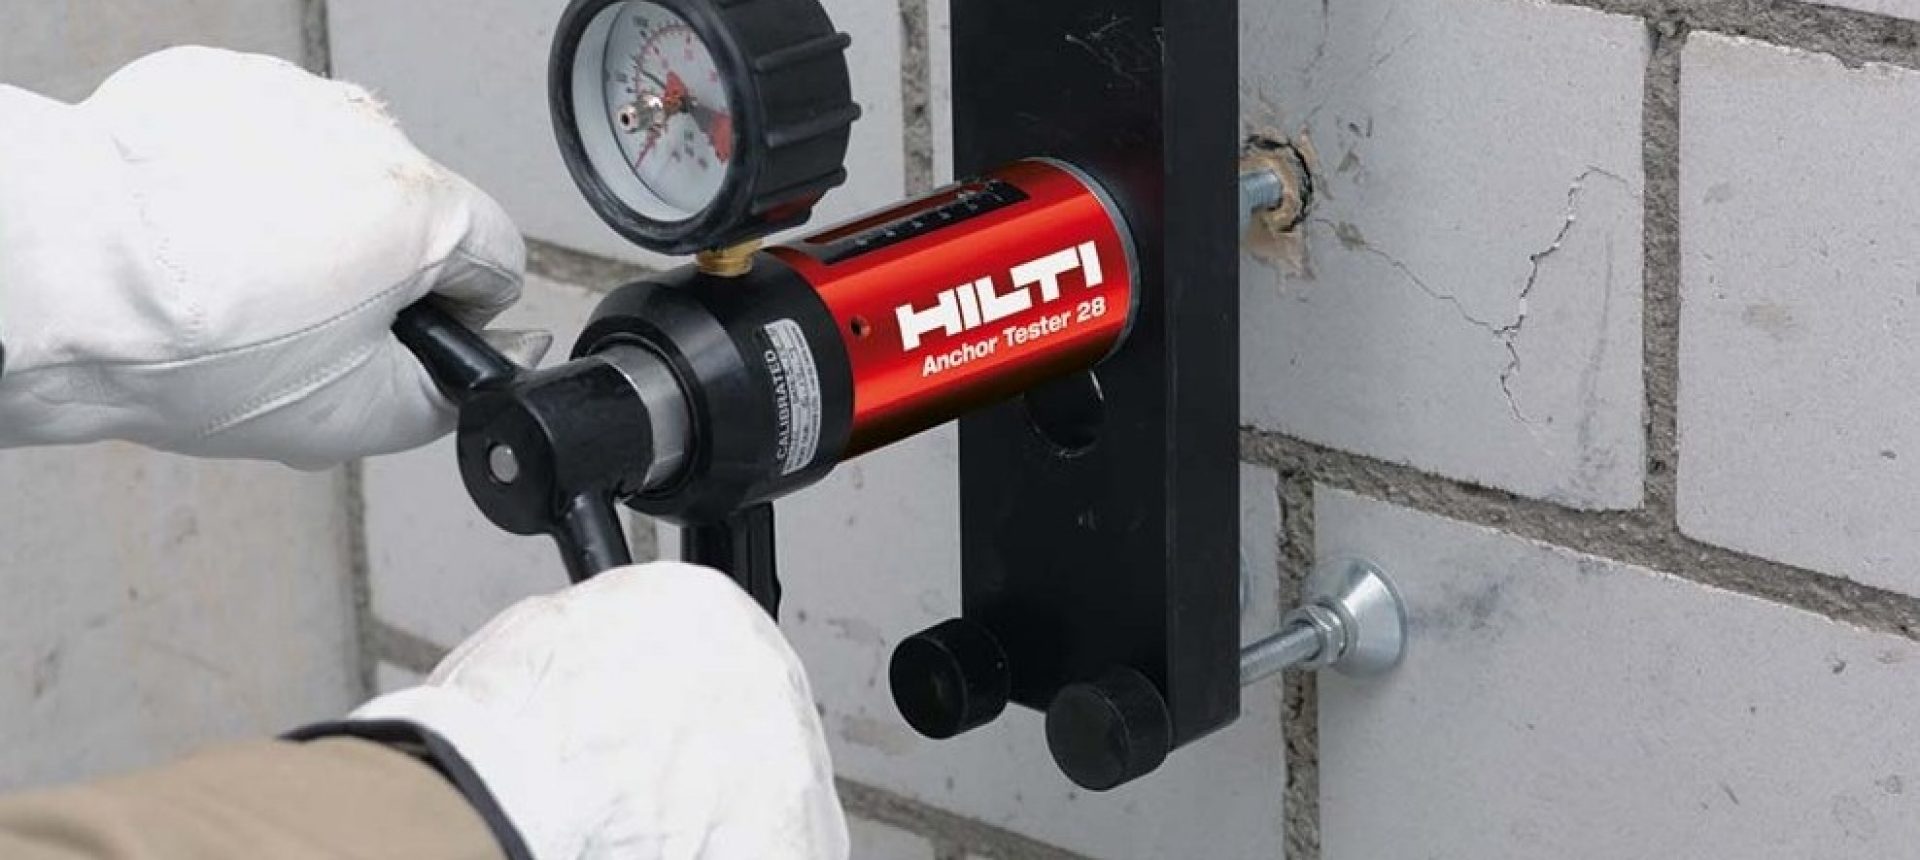 Hilti engineering services onsite testing